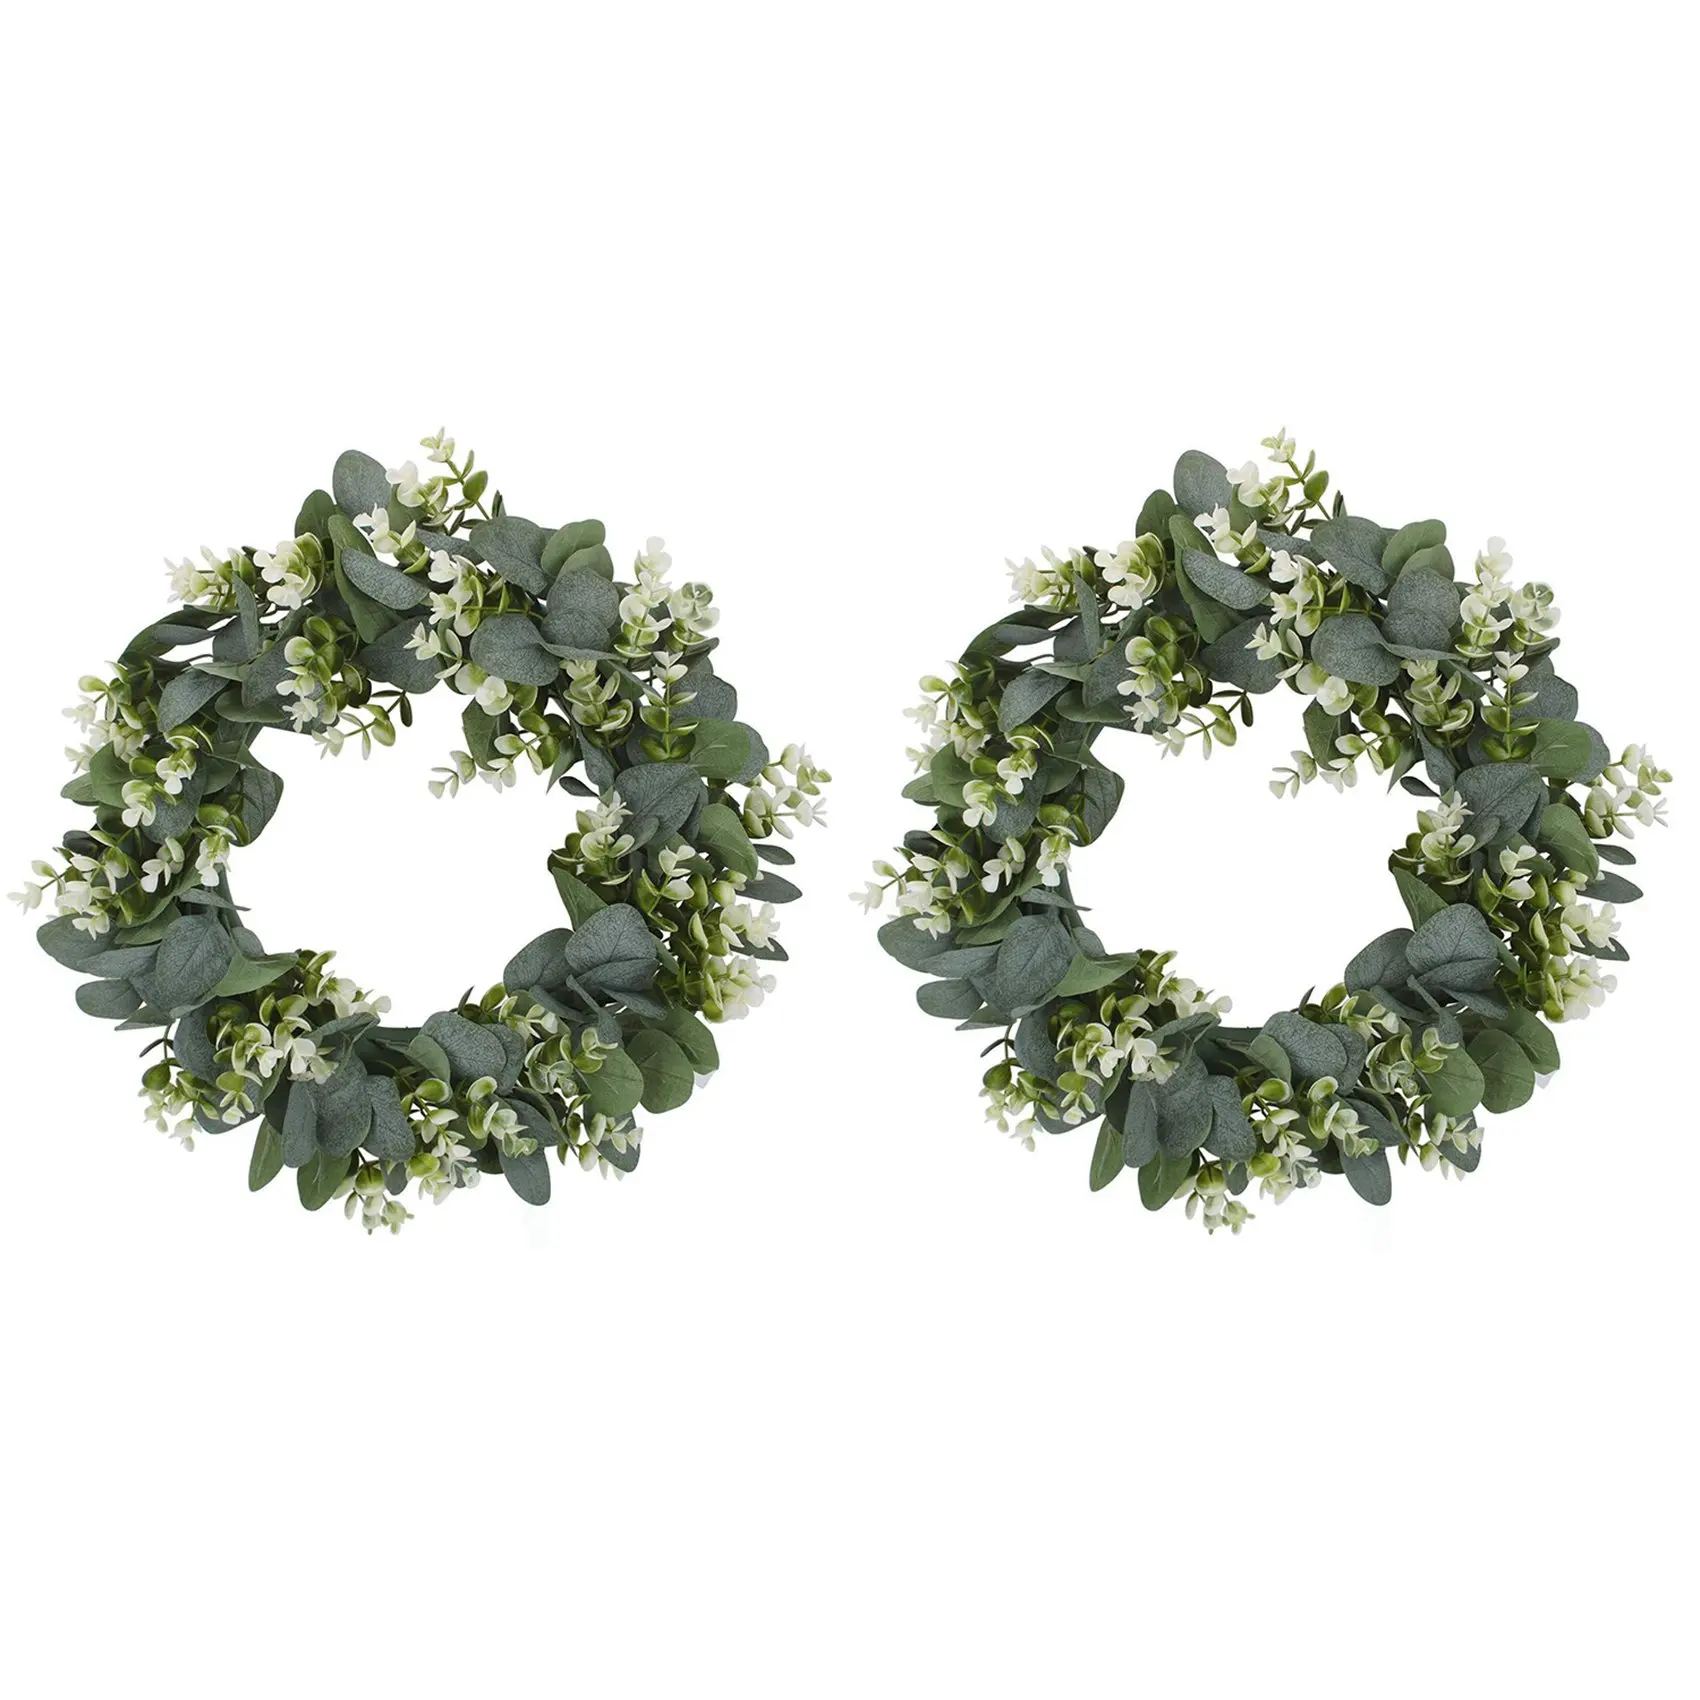 

2X Faux Boxwood Wreath 12.9Inch Artificial Green Leaves Wreath for Front Door Hanging Wall Window Party Decoration